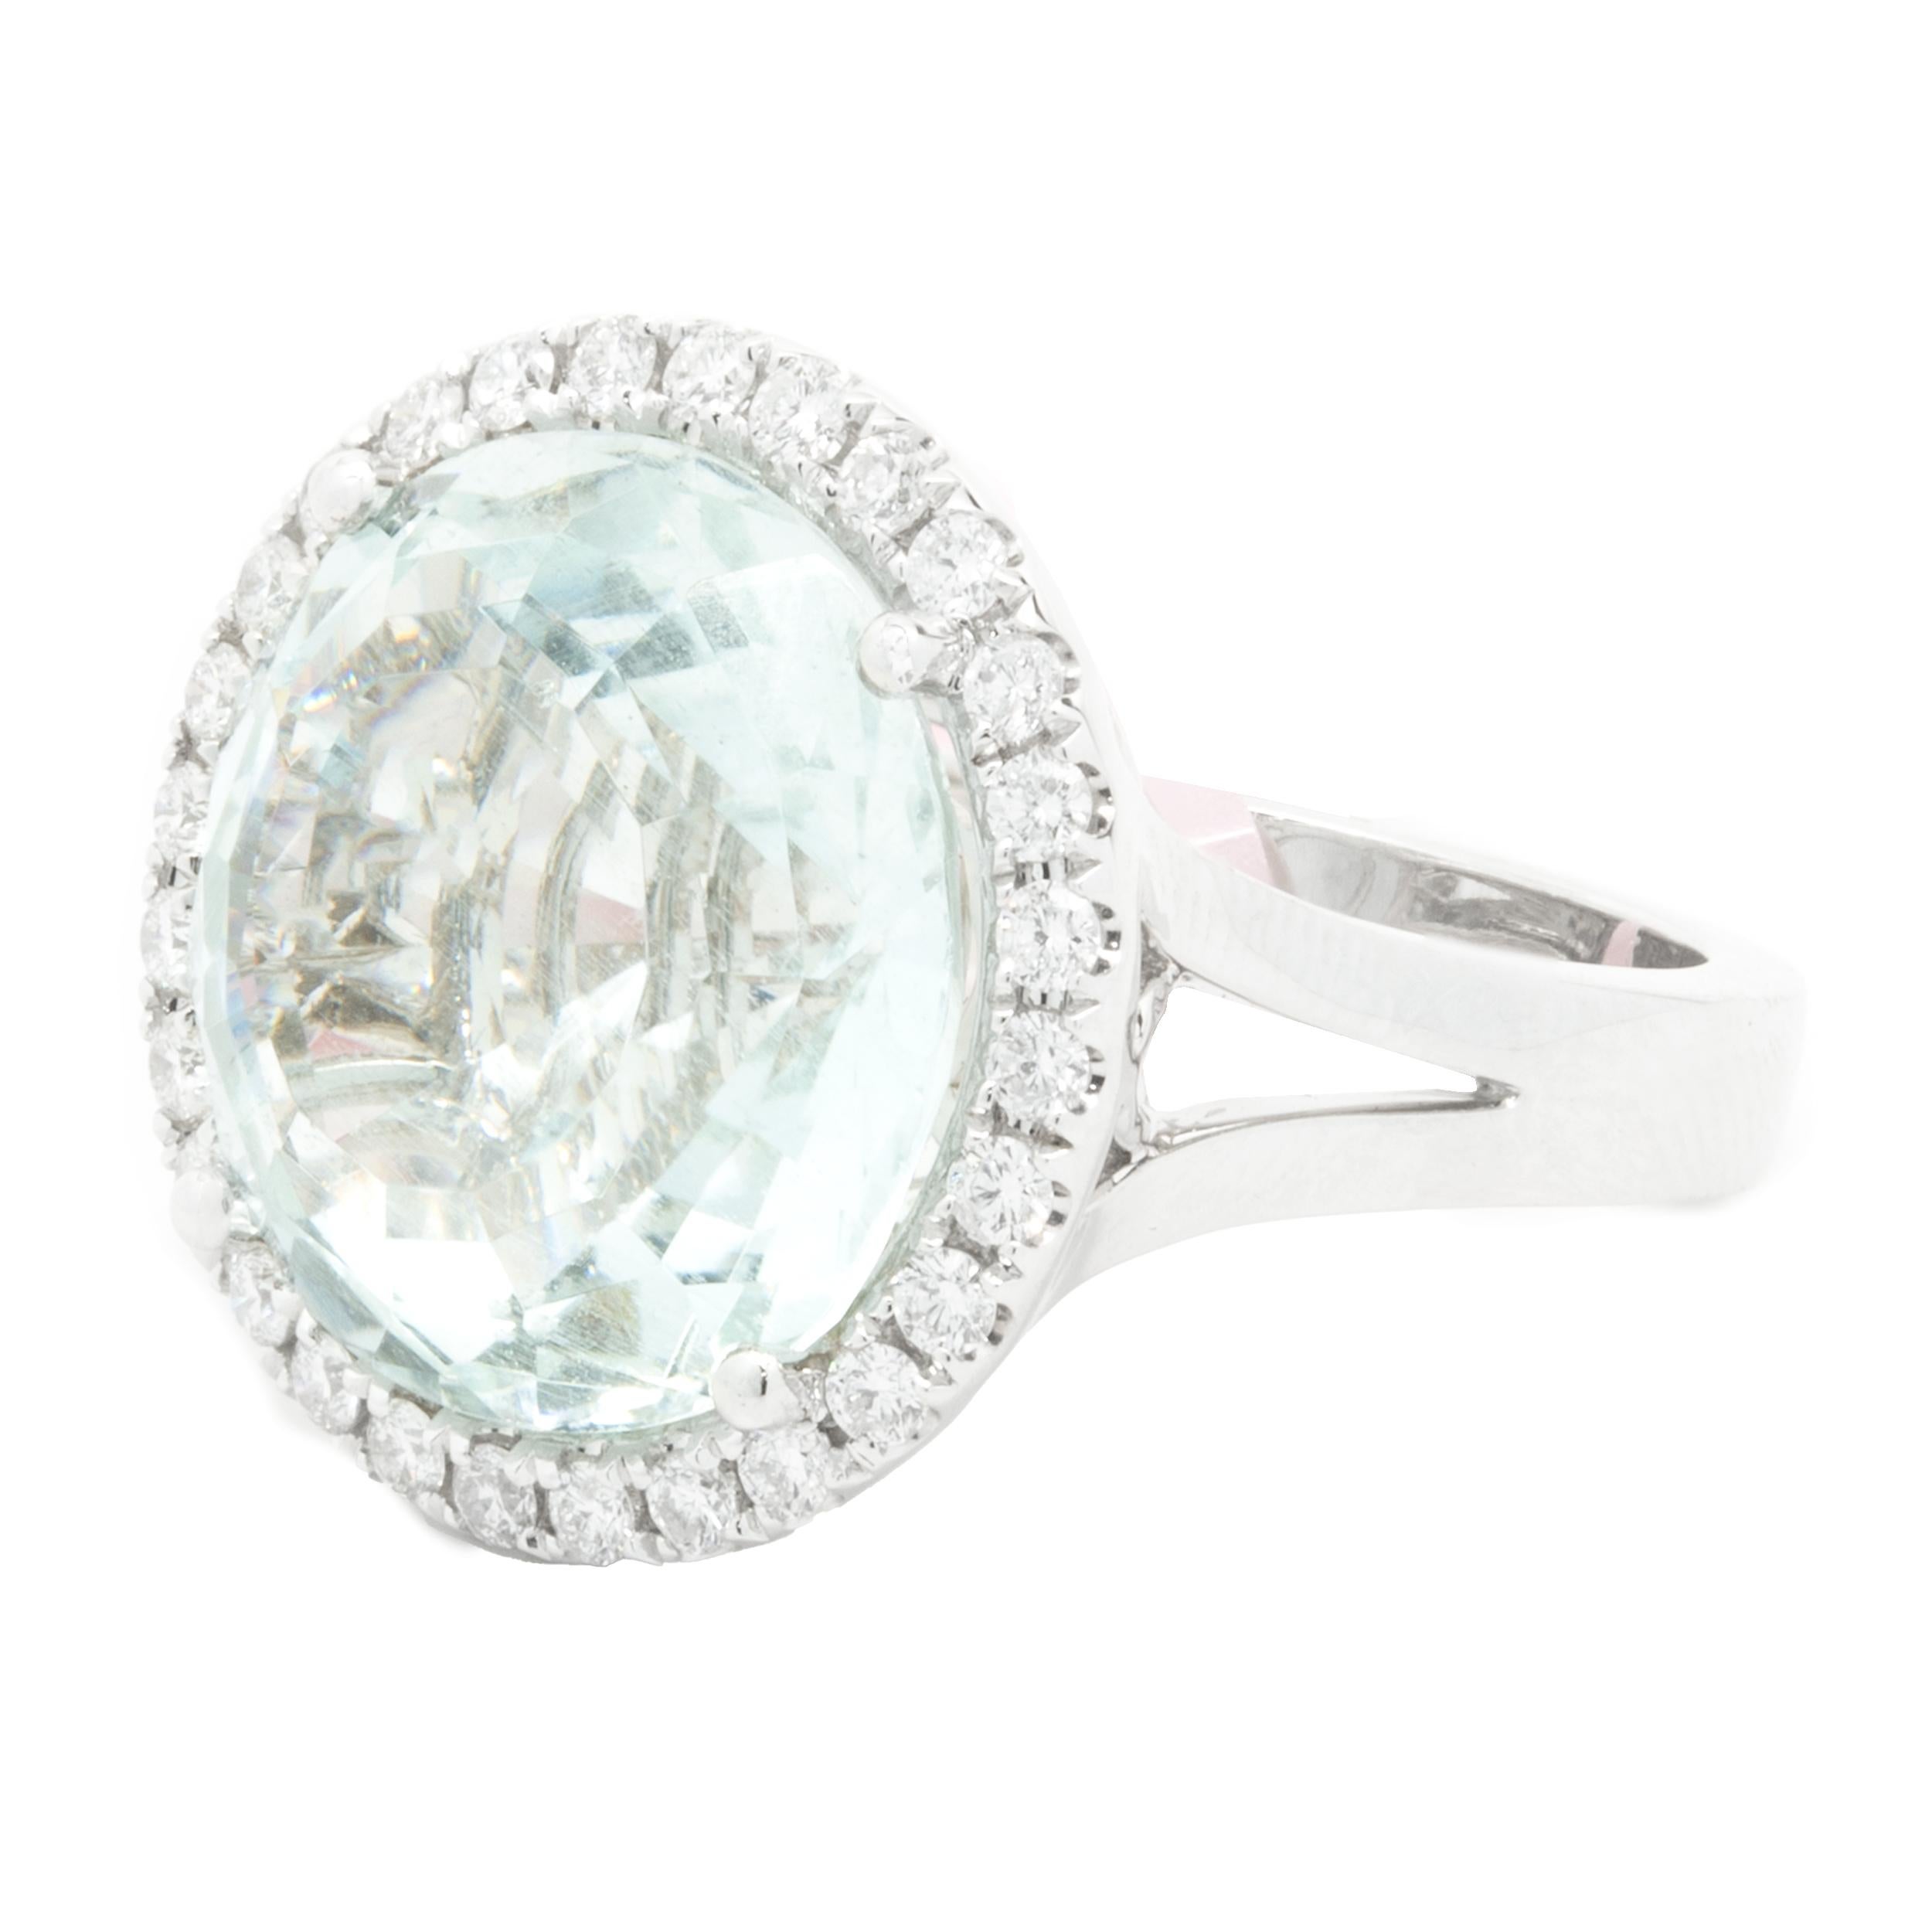 Designer: custom
Material: 18K white gold
Diamond: 28 round brilliant cut = 0.62cttw
Color: G
Clarity: VS1-2
Aquamarine: 1 round cut = 14.22ct
Ring Size: 6 (complimentary sizing available)
Weight: 13.30 grams